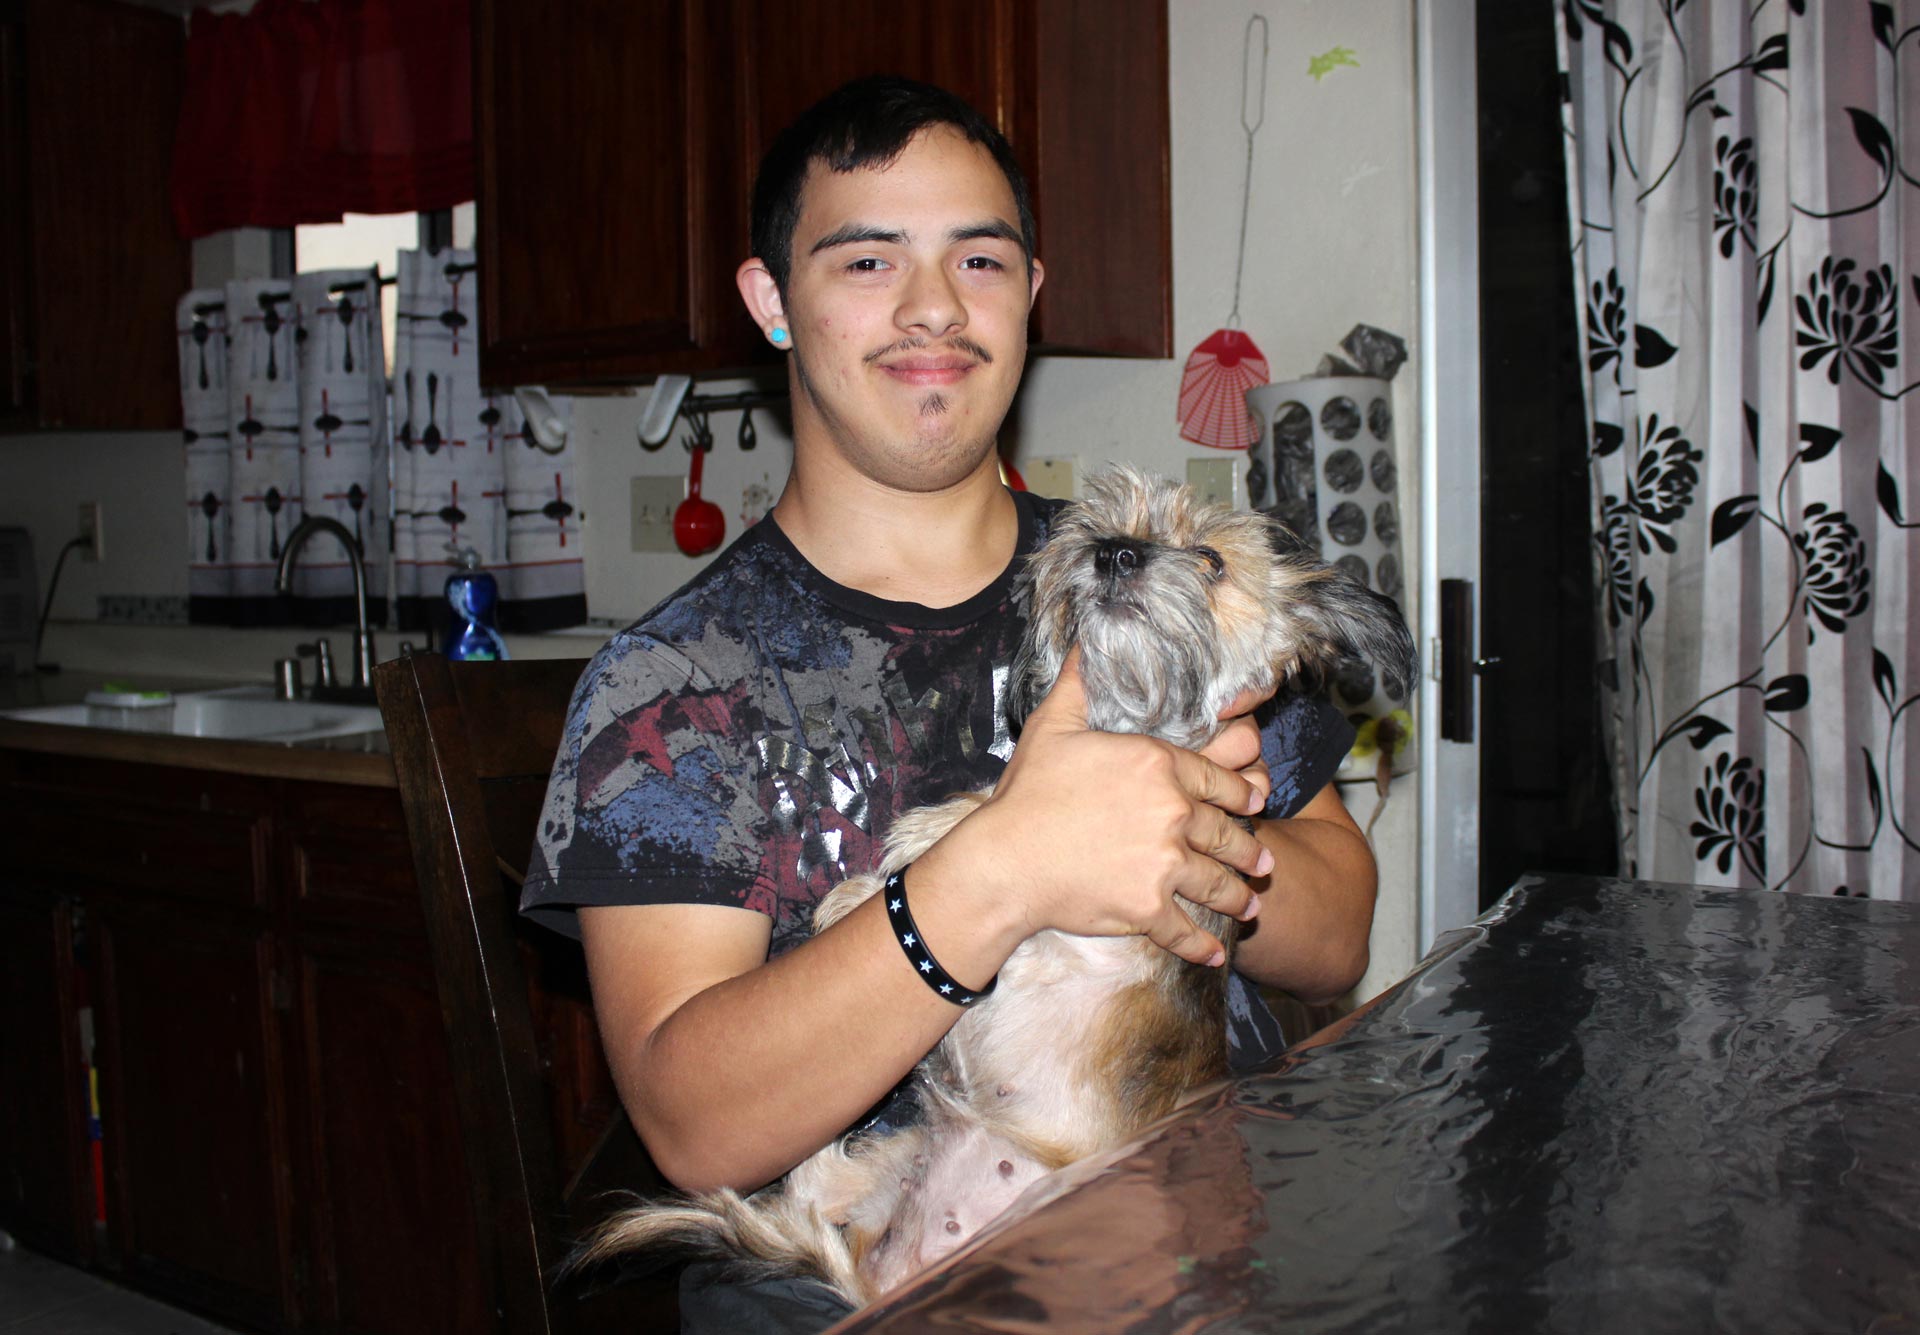 Christian Roldan, 18, holds his dog at home. He has Down syndrome and can respond to questions only with one or two-word replies. He was hogtied and arrested in 2013 for resisting a school police officer’s attempts to search him at the Chino Valley Unified School District. 